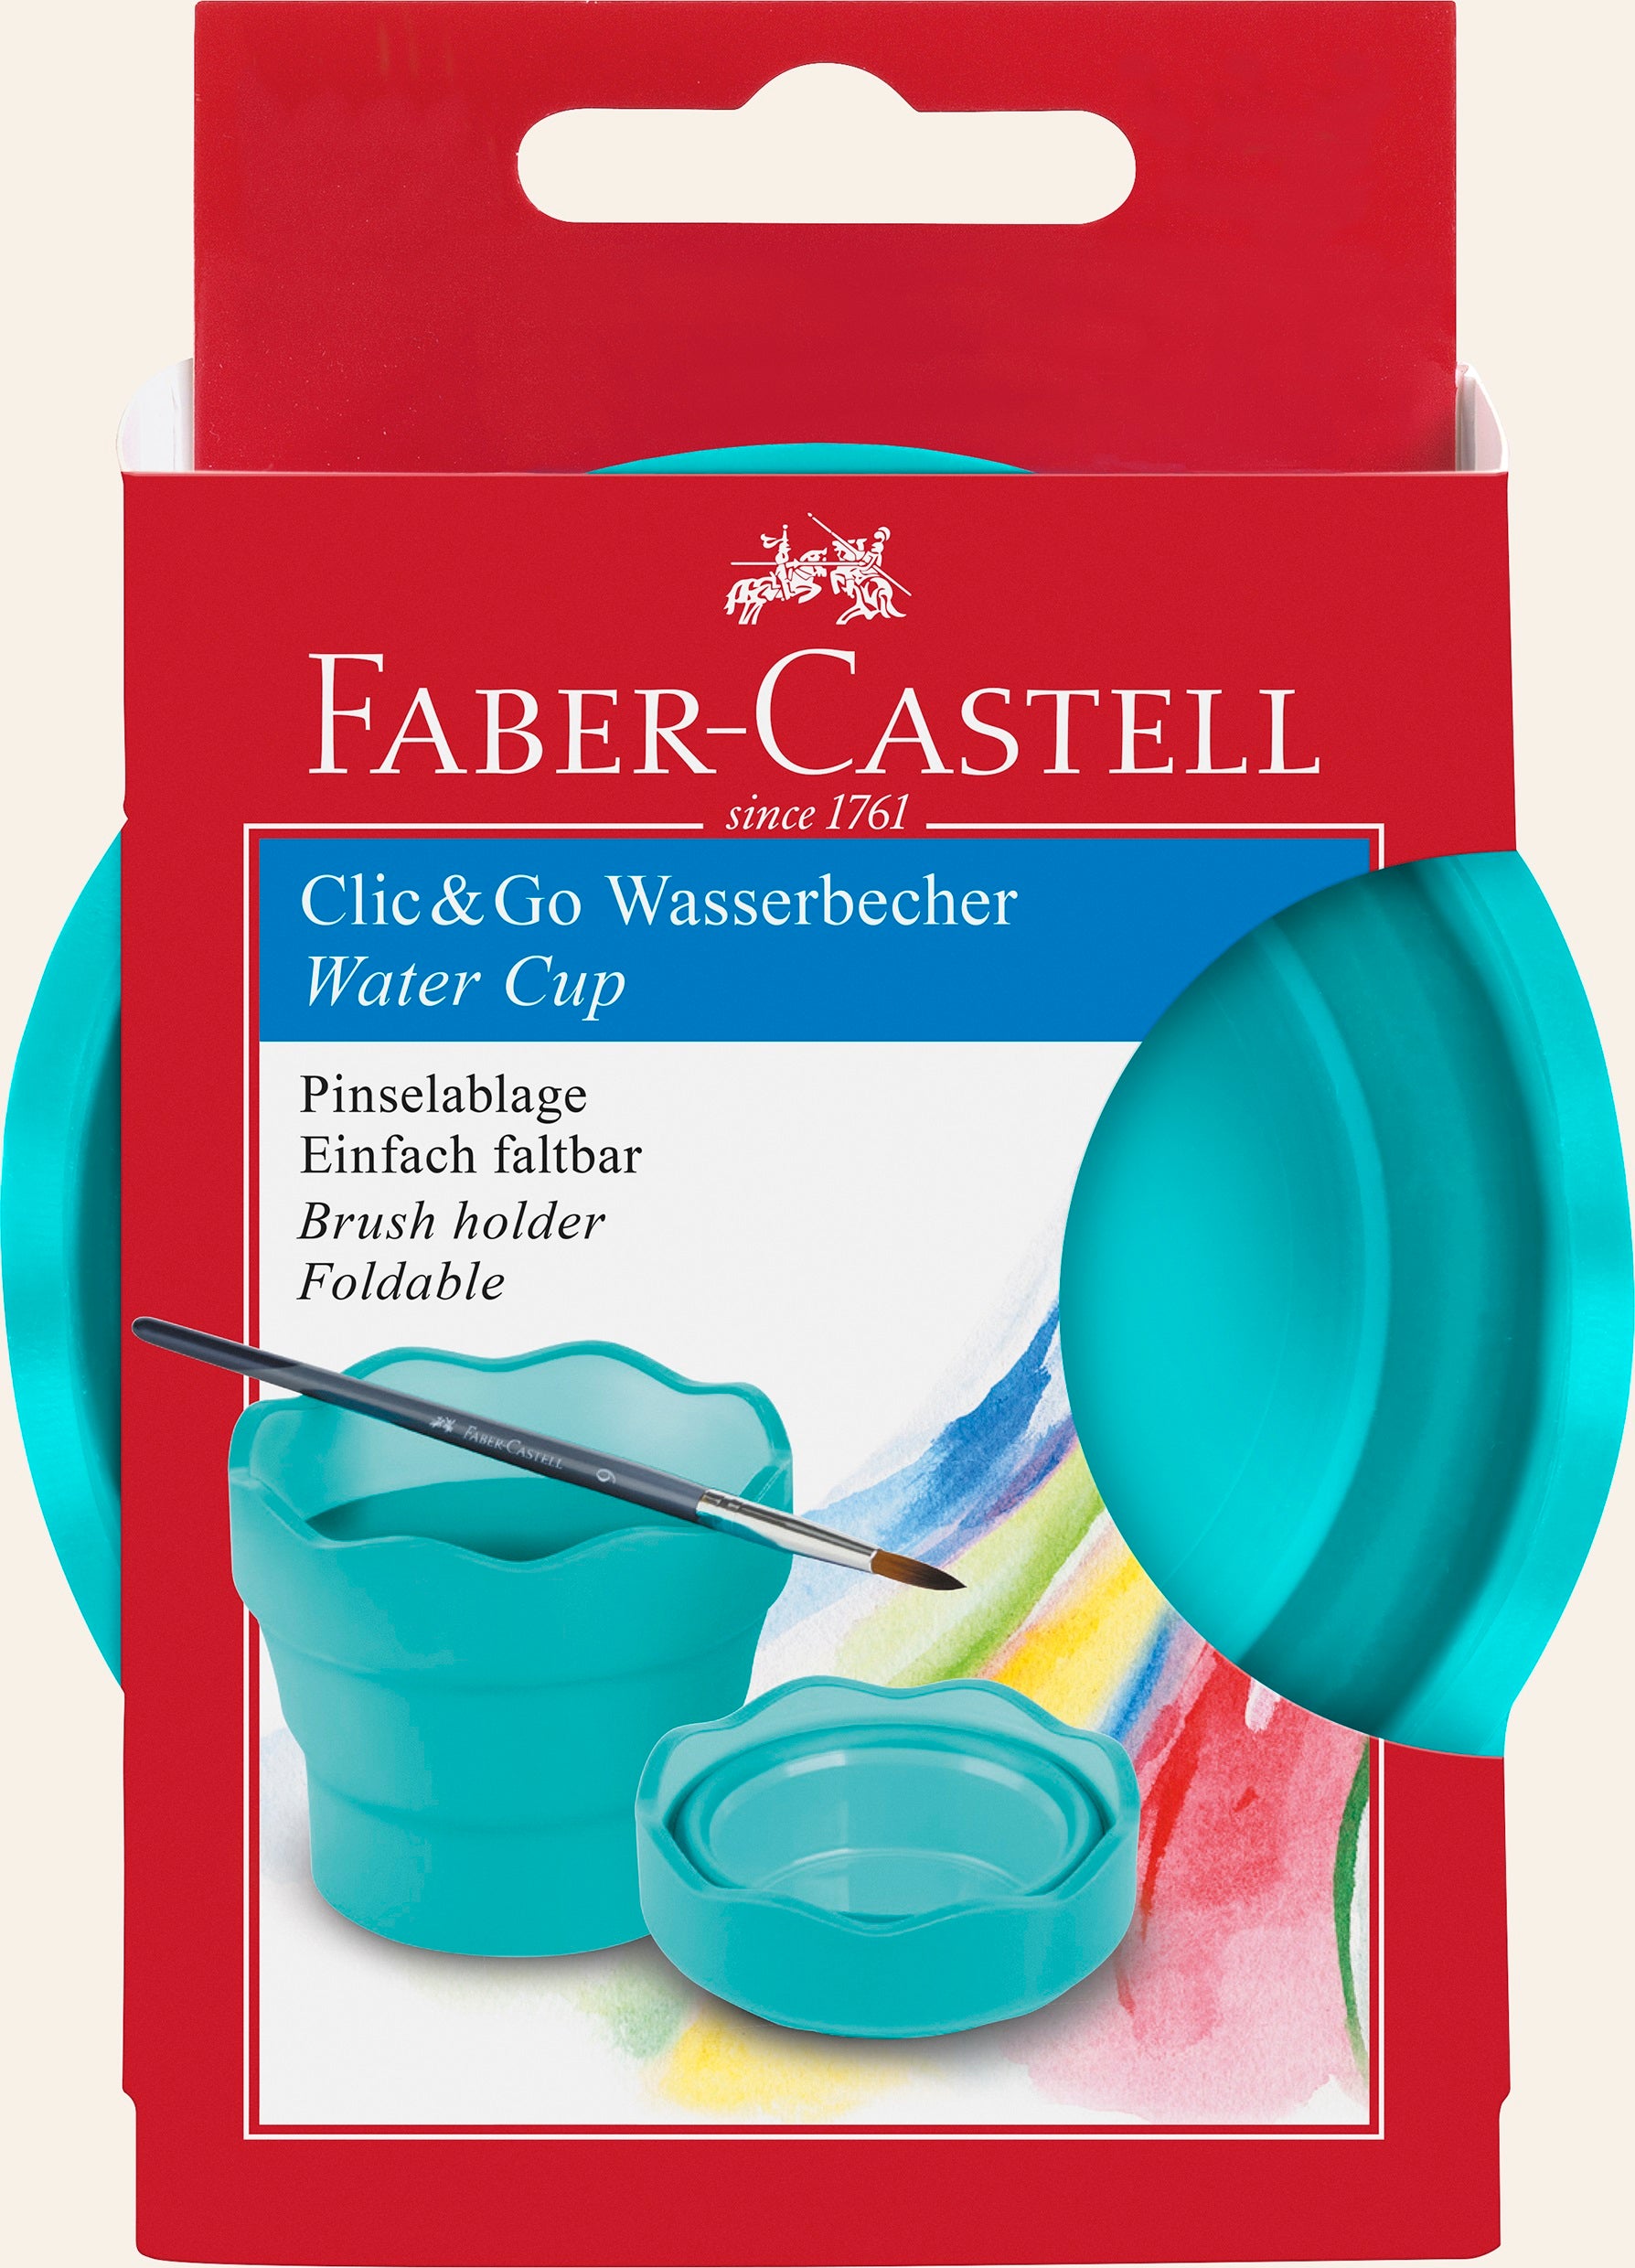 Retail packaging for the Faber Castell Clic&Go painting water cup. The packaging has a red outline and shows the turquoise foldable water cup in action, with a paintbrush resting on top.